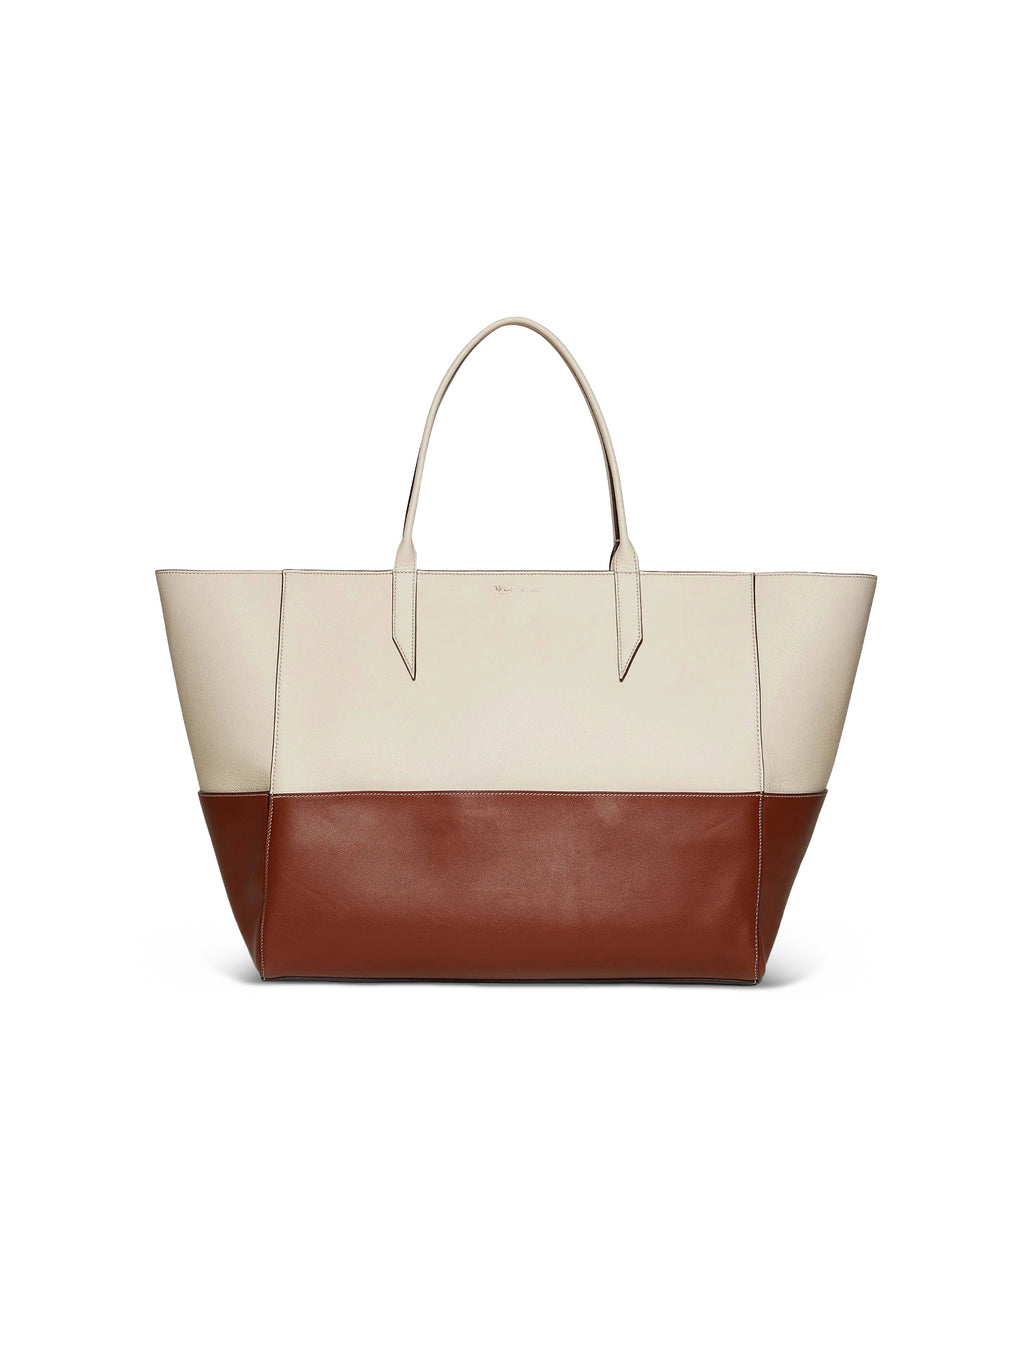 Celine Small Vertical Cabas Tote availability and review?